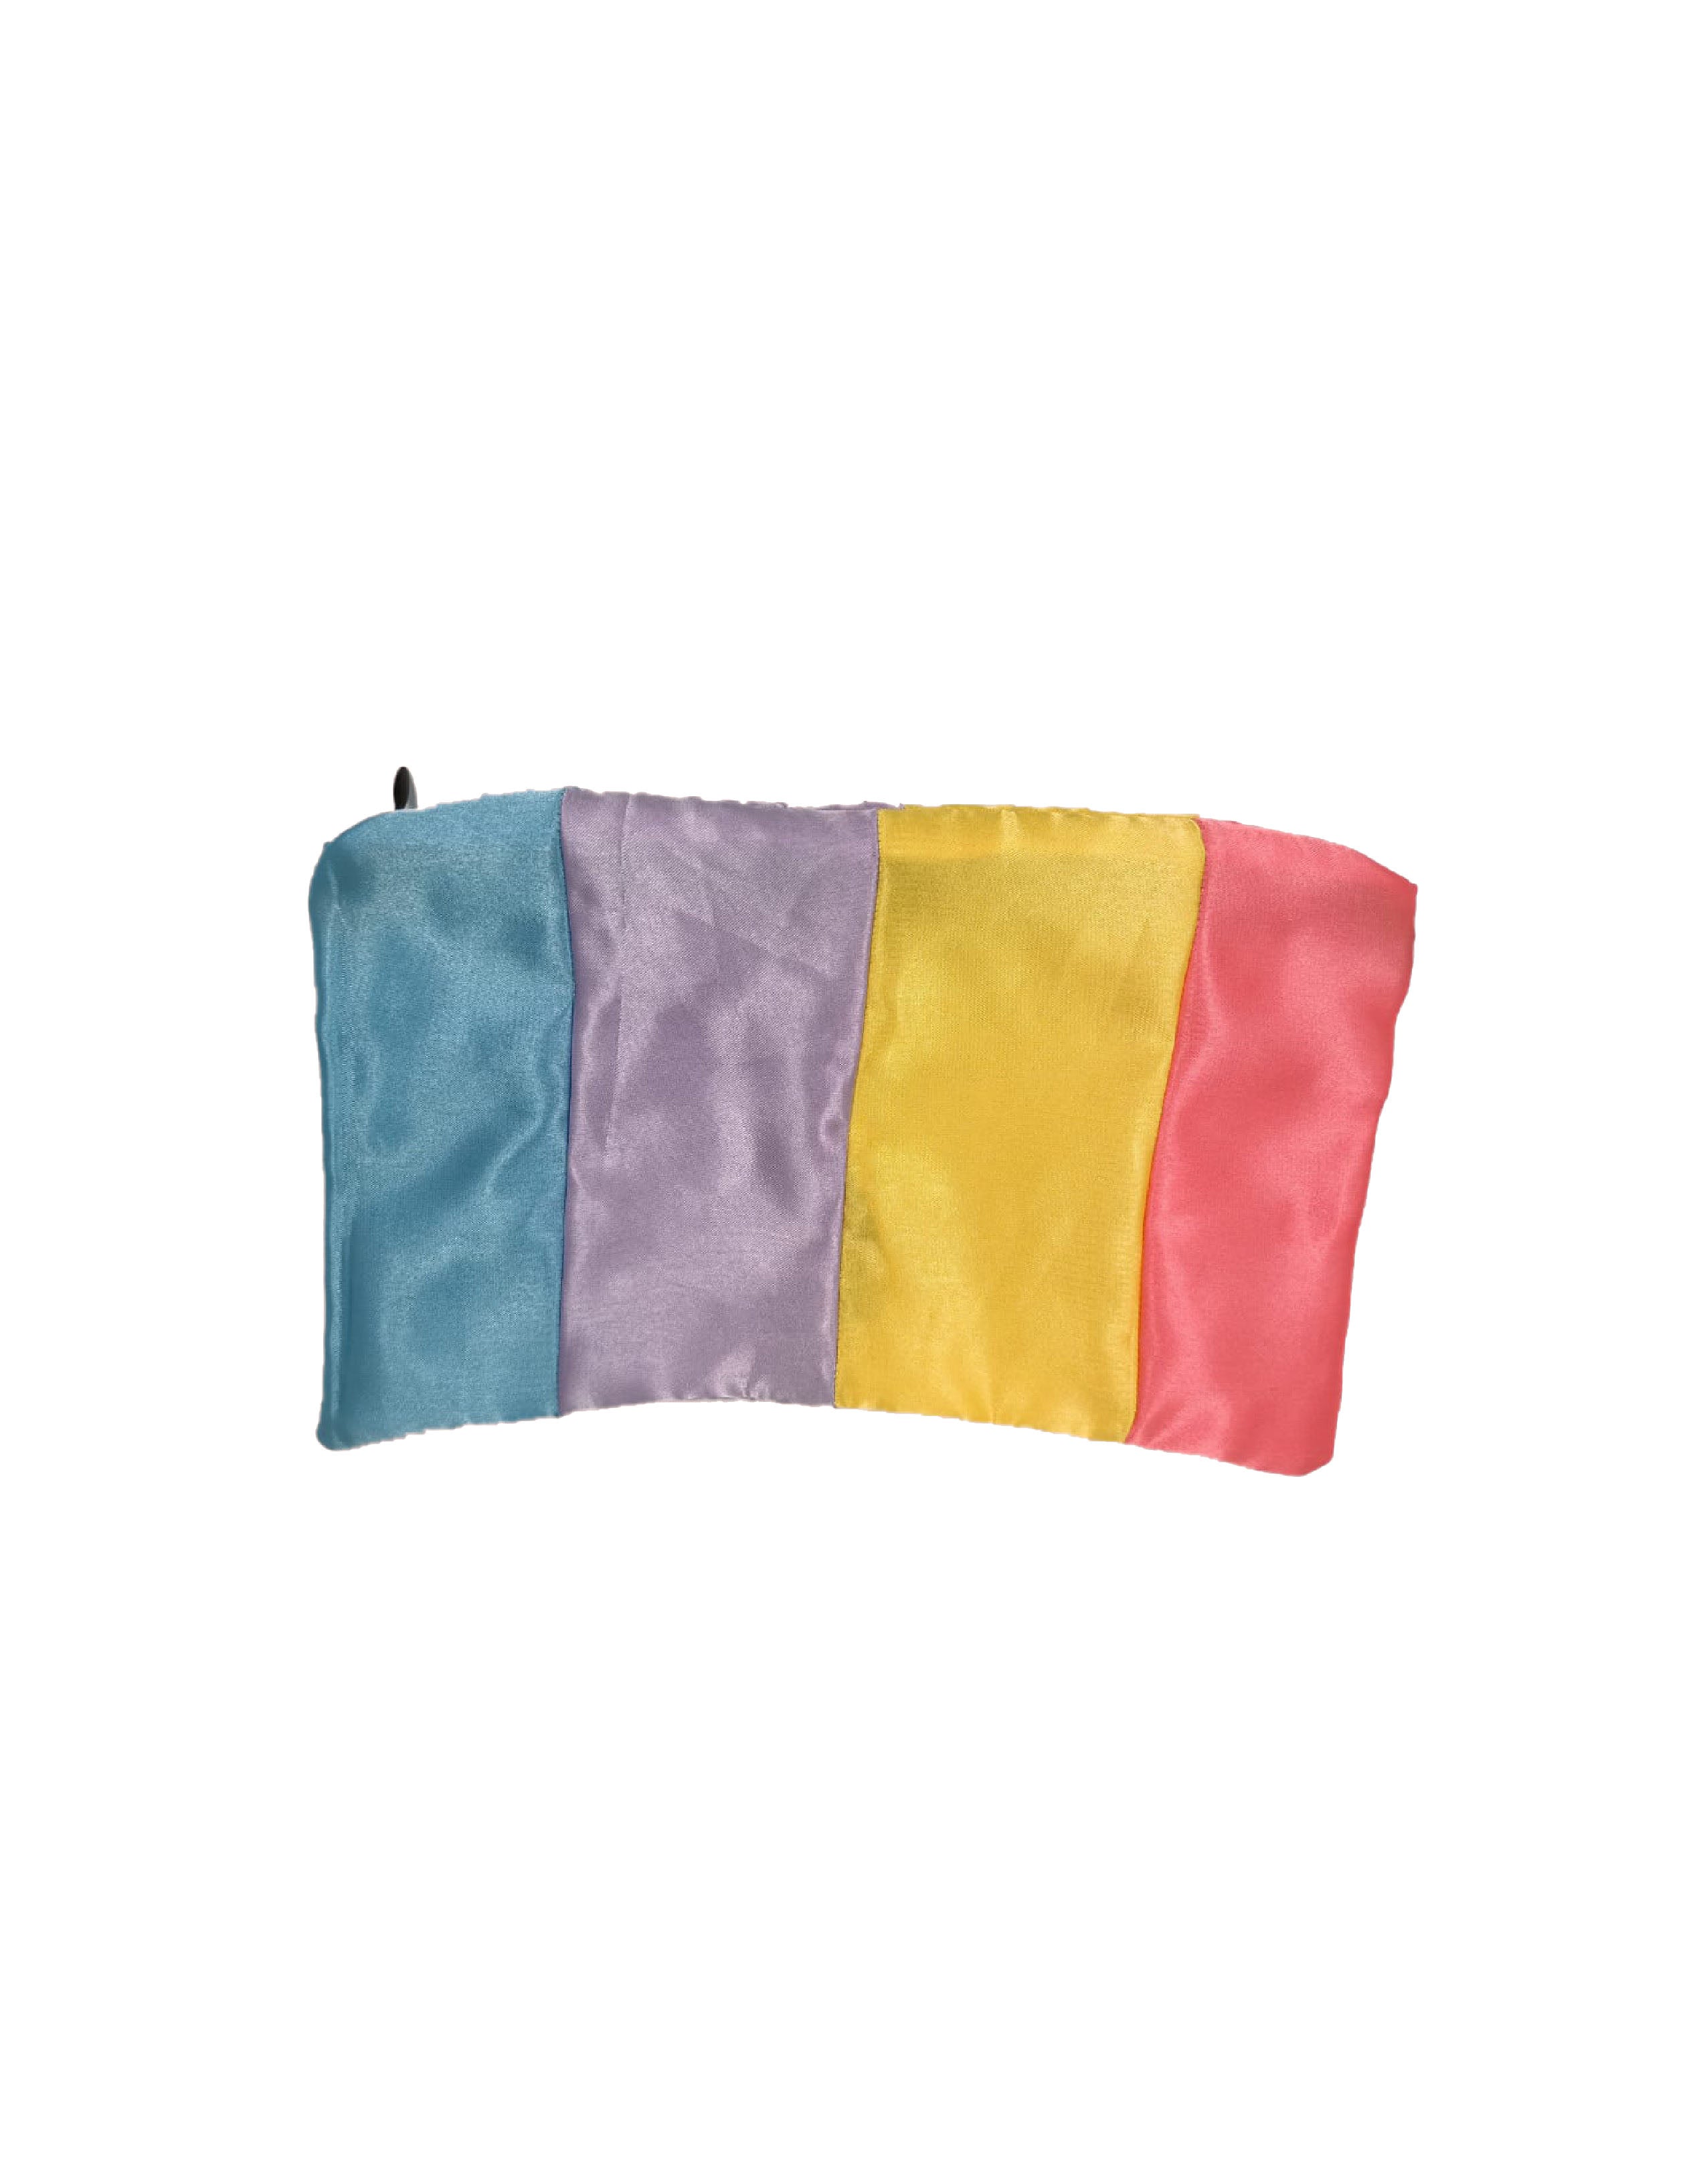 Makeup pouch - Manetain Store